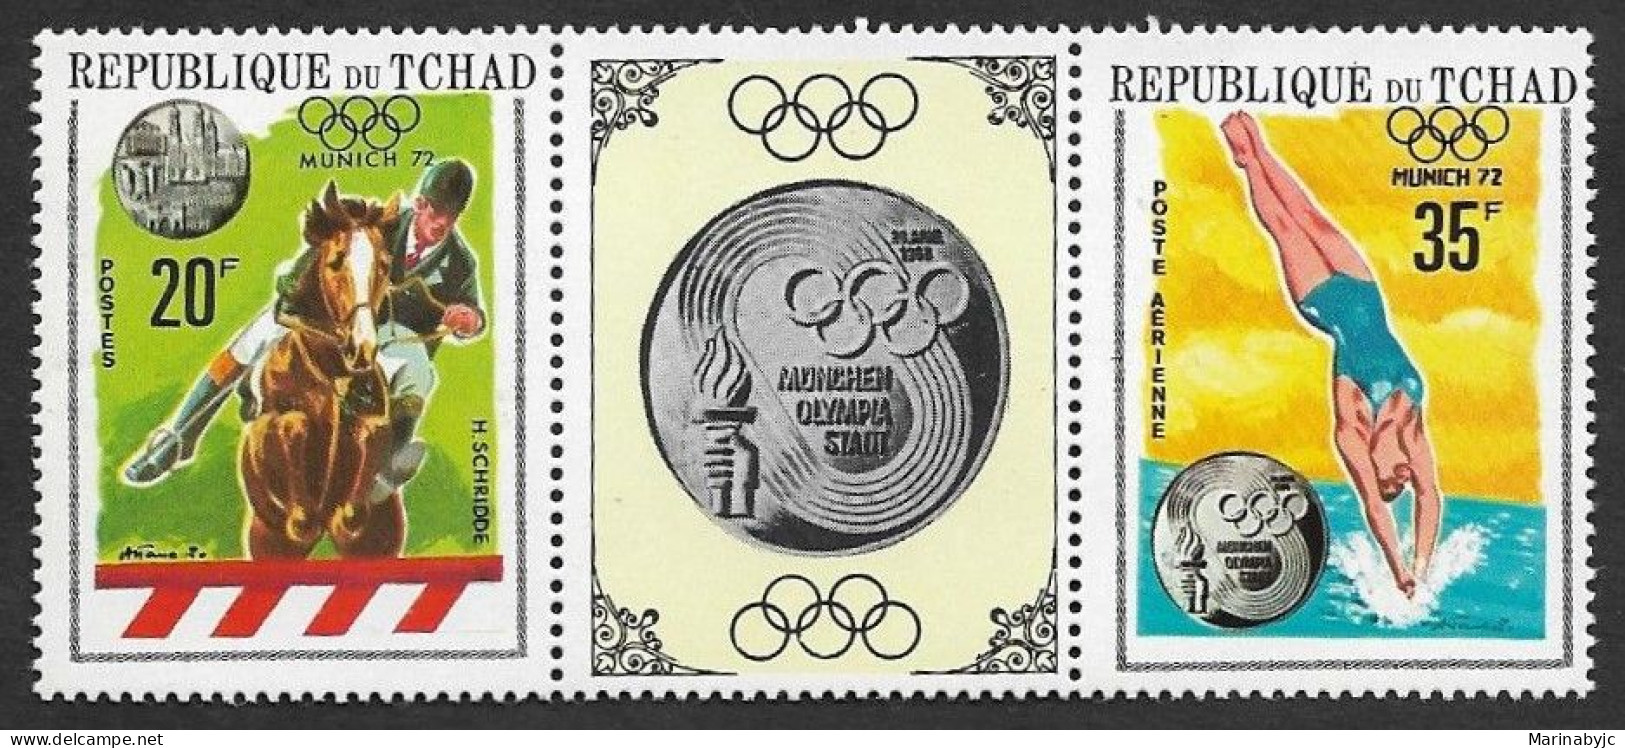 SD)1972 CHAD SPORTS SERIES, OLYMPIC GAMES MUNICH, GERMAN R. F. WINNERS, STRIP OF 3 MNH STAMPS - Ciad (1960-...)